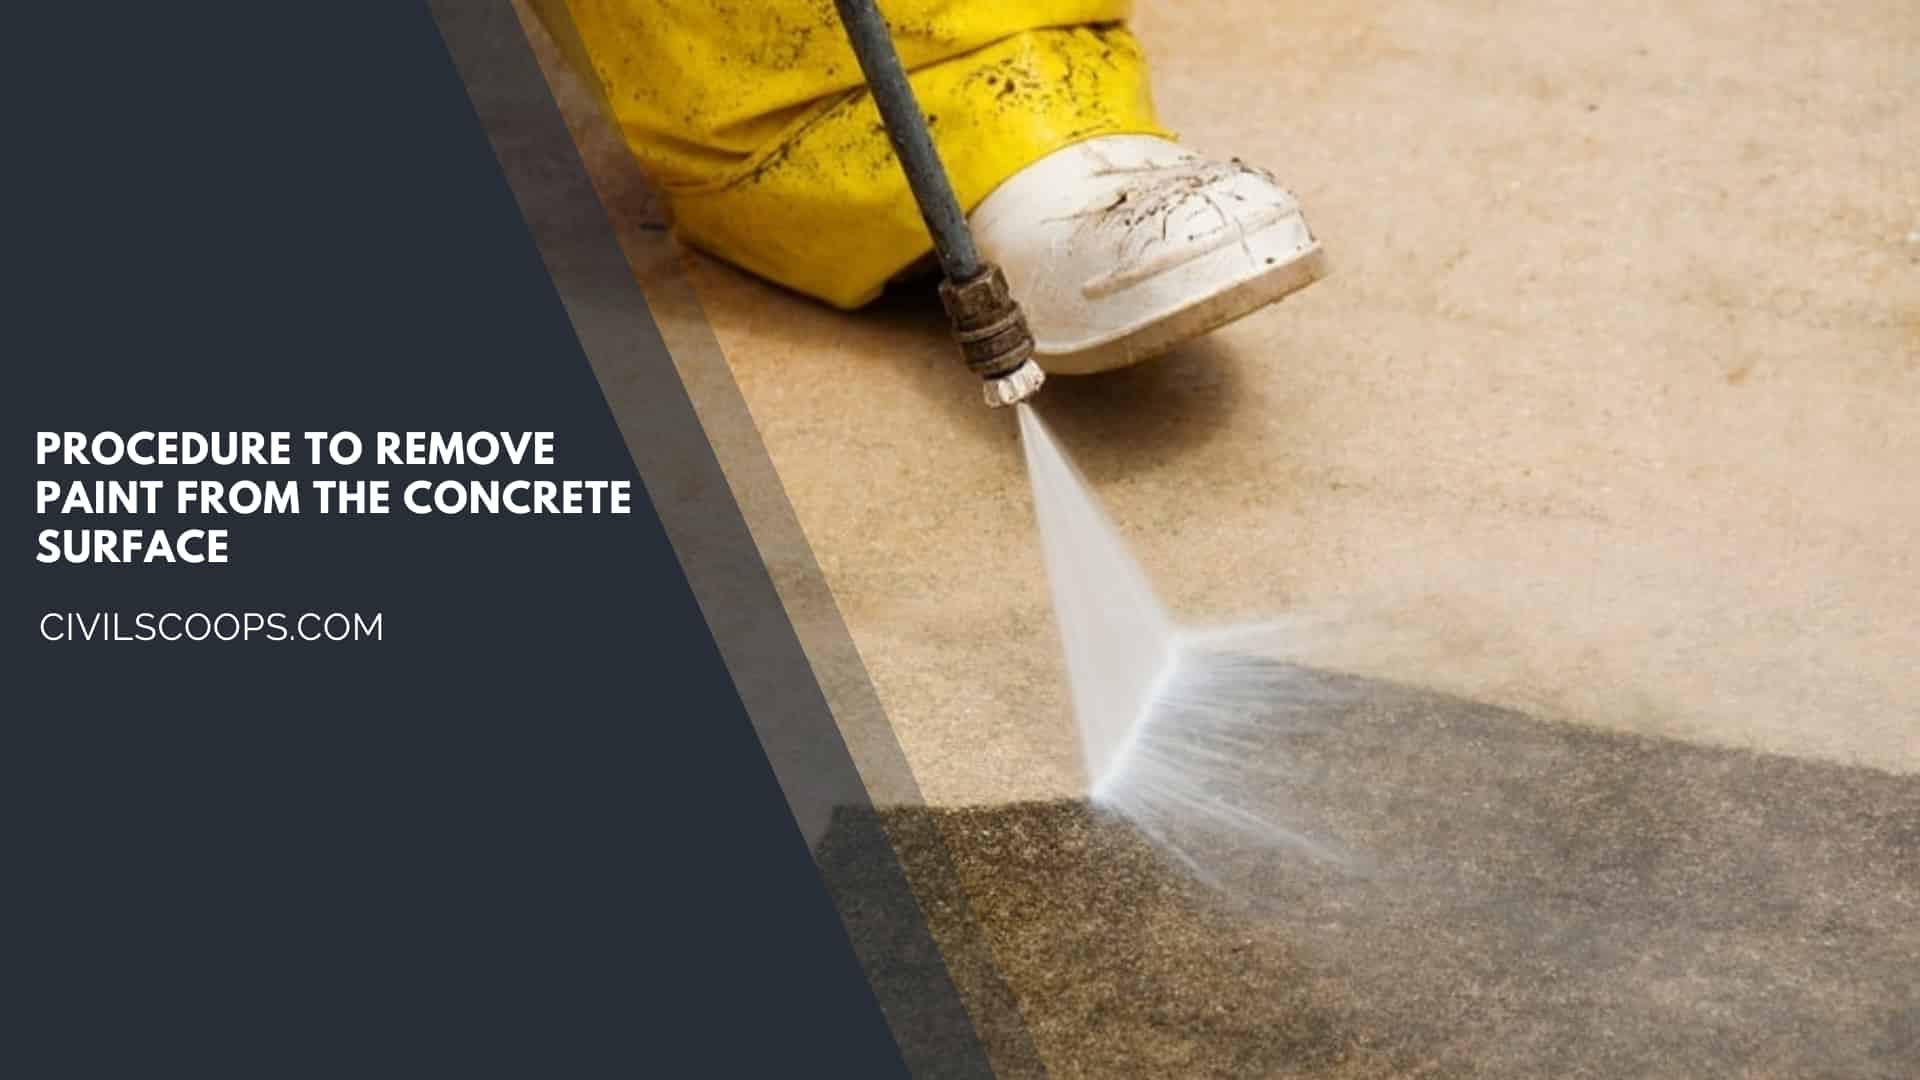 Procedure to Remove Paint from the Concrete Surface